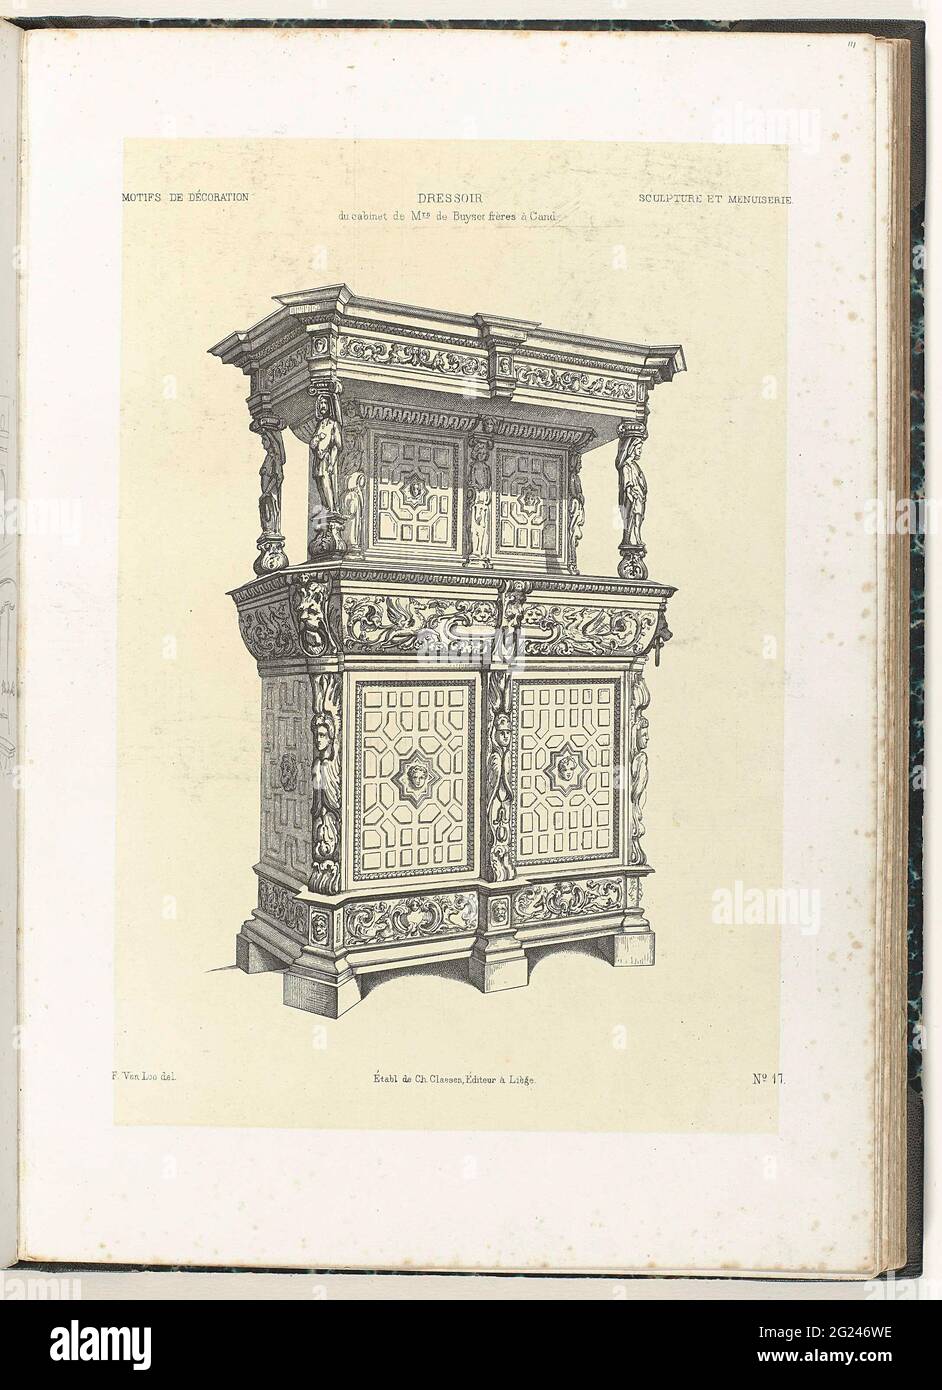 Buffet cabinet; Dressoir du Cabinet de Mrs de Buyser Frères à Gand .. The  doors and sides of the sideboard are decorated with masks in a star shape.  Top left is listed: